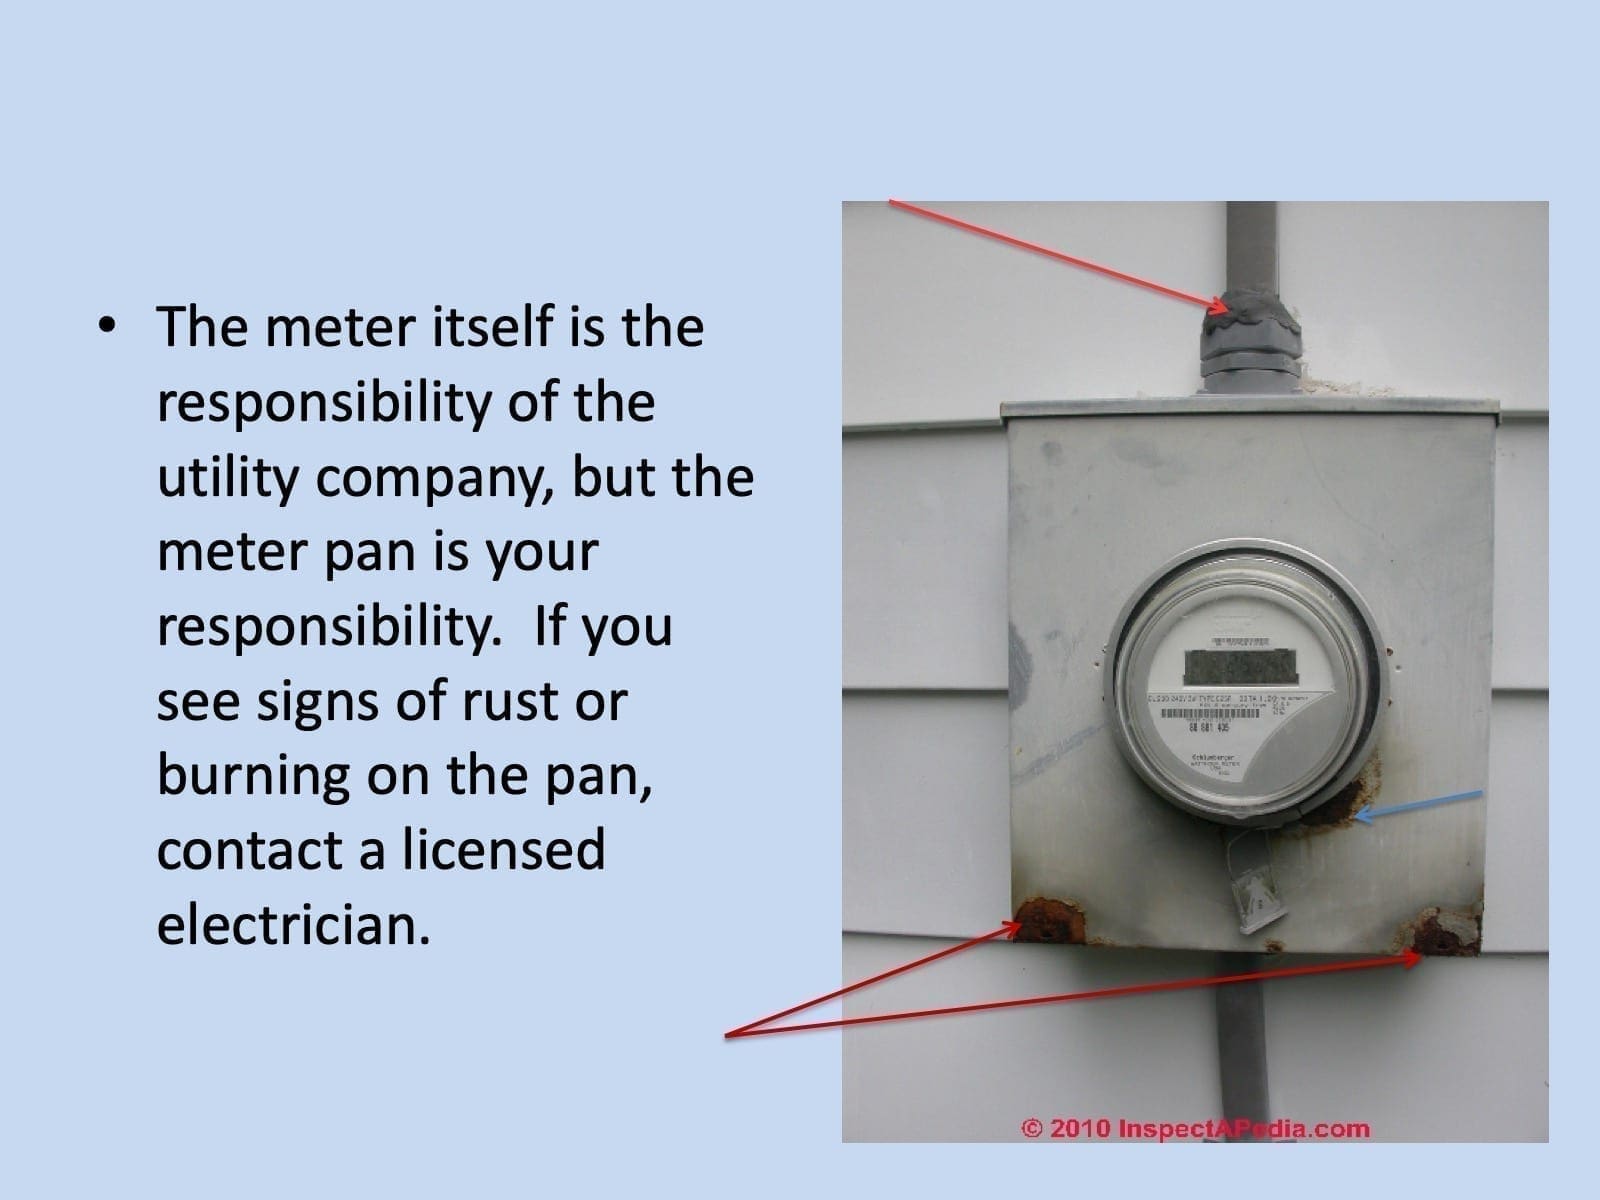 The meter bill, a crucial aspect of home improvement, is the responsibility of the utility company.